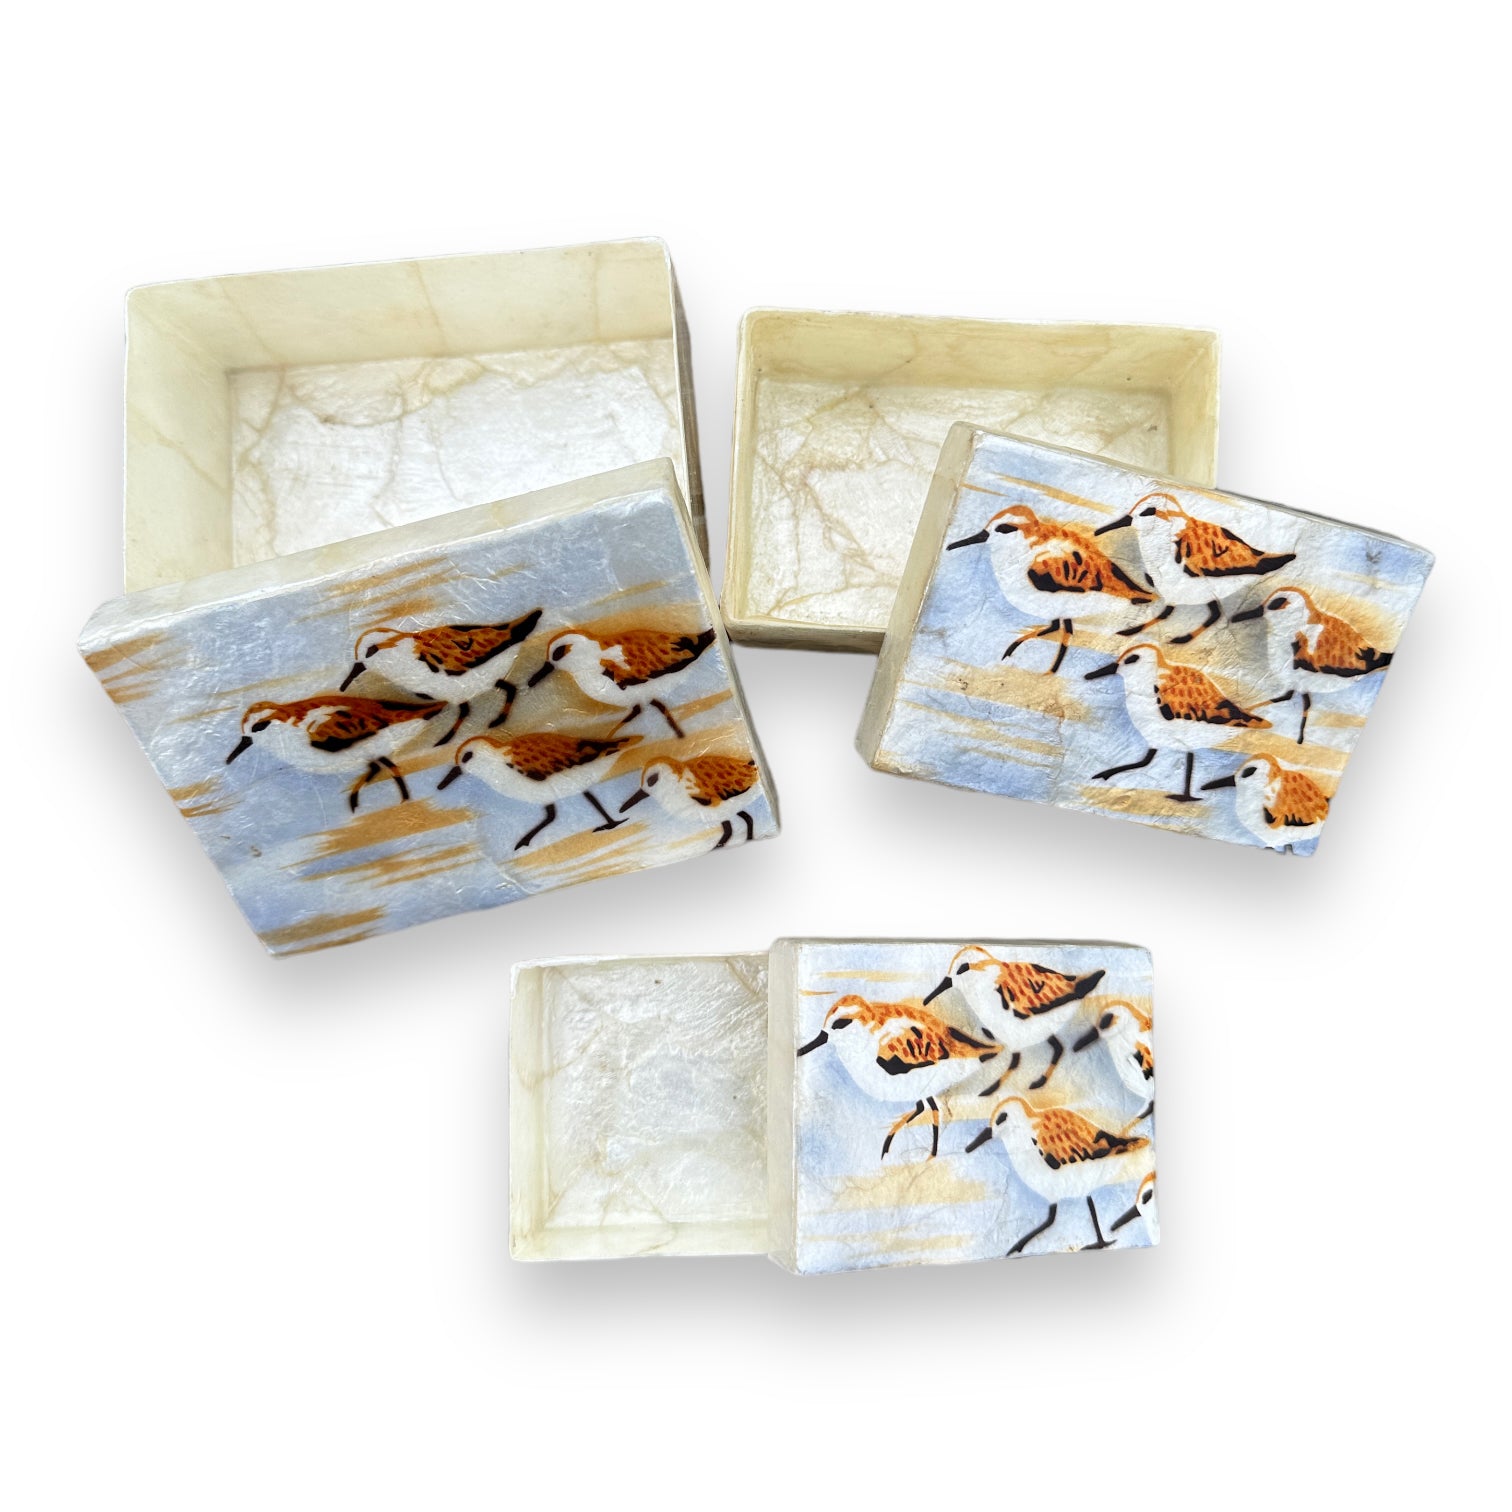 Capiz Trinket Box With Painted Sandpipers - Mellow Monkey